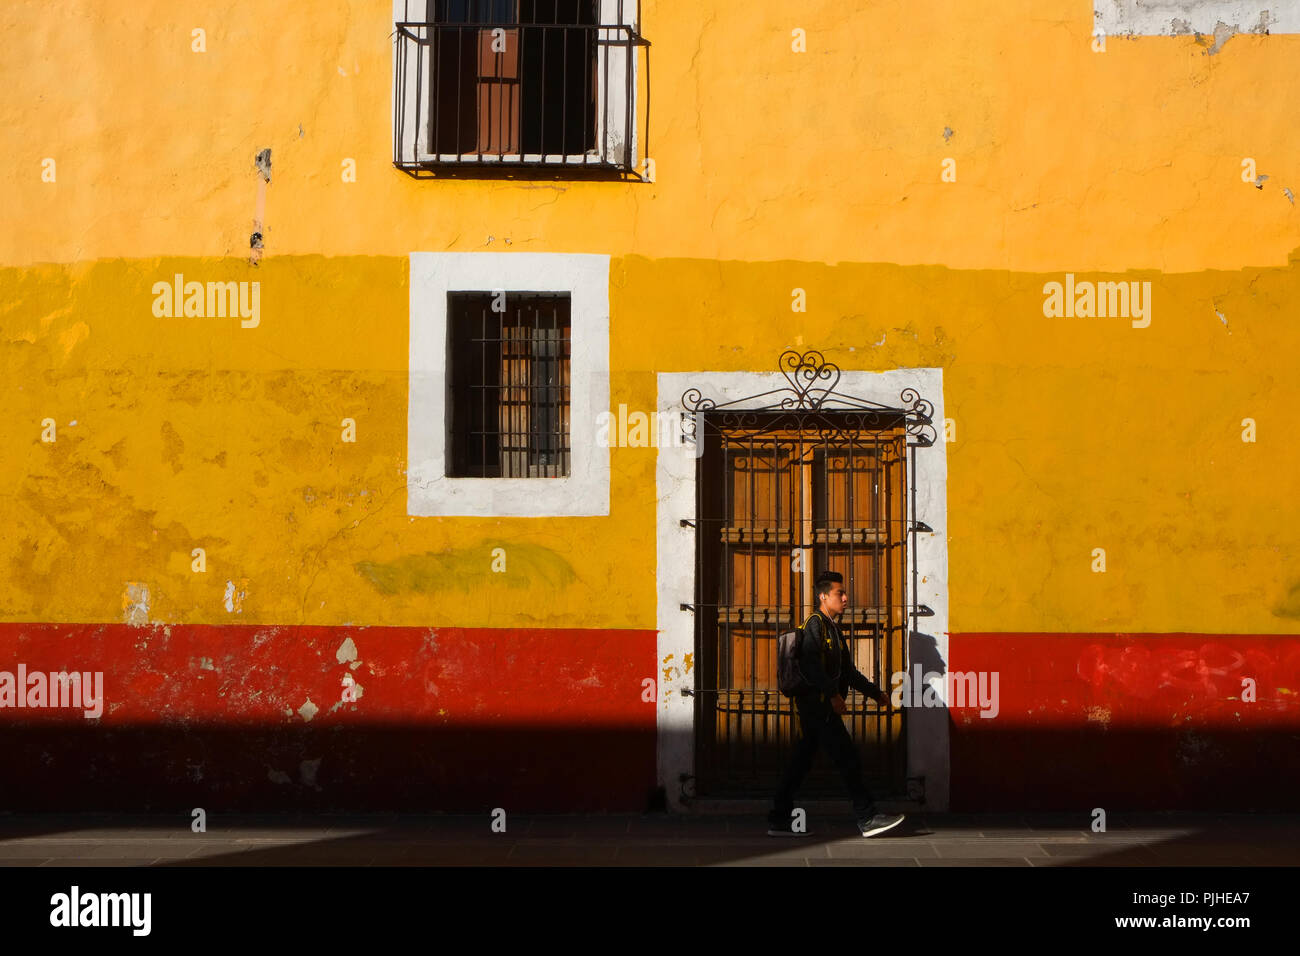 Bright red and yellow wall in the early morning light, Puebla, Mexico Stock Photo